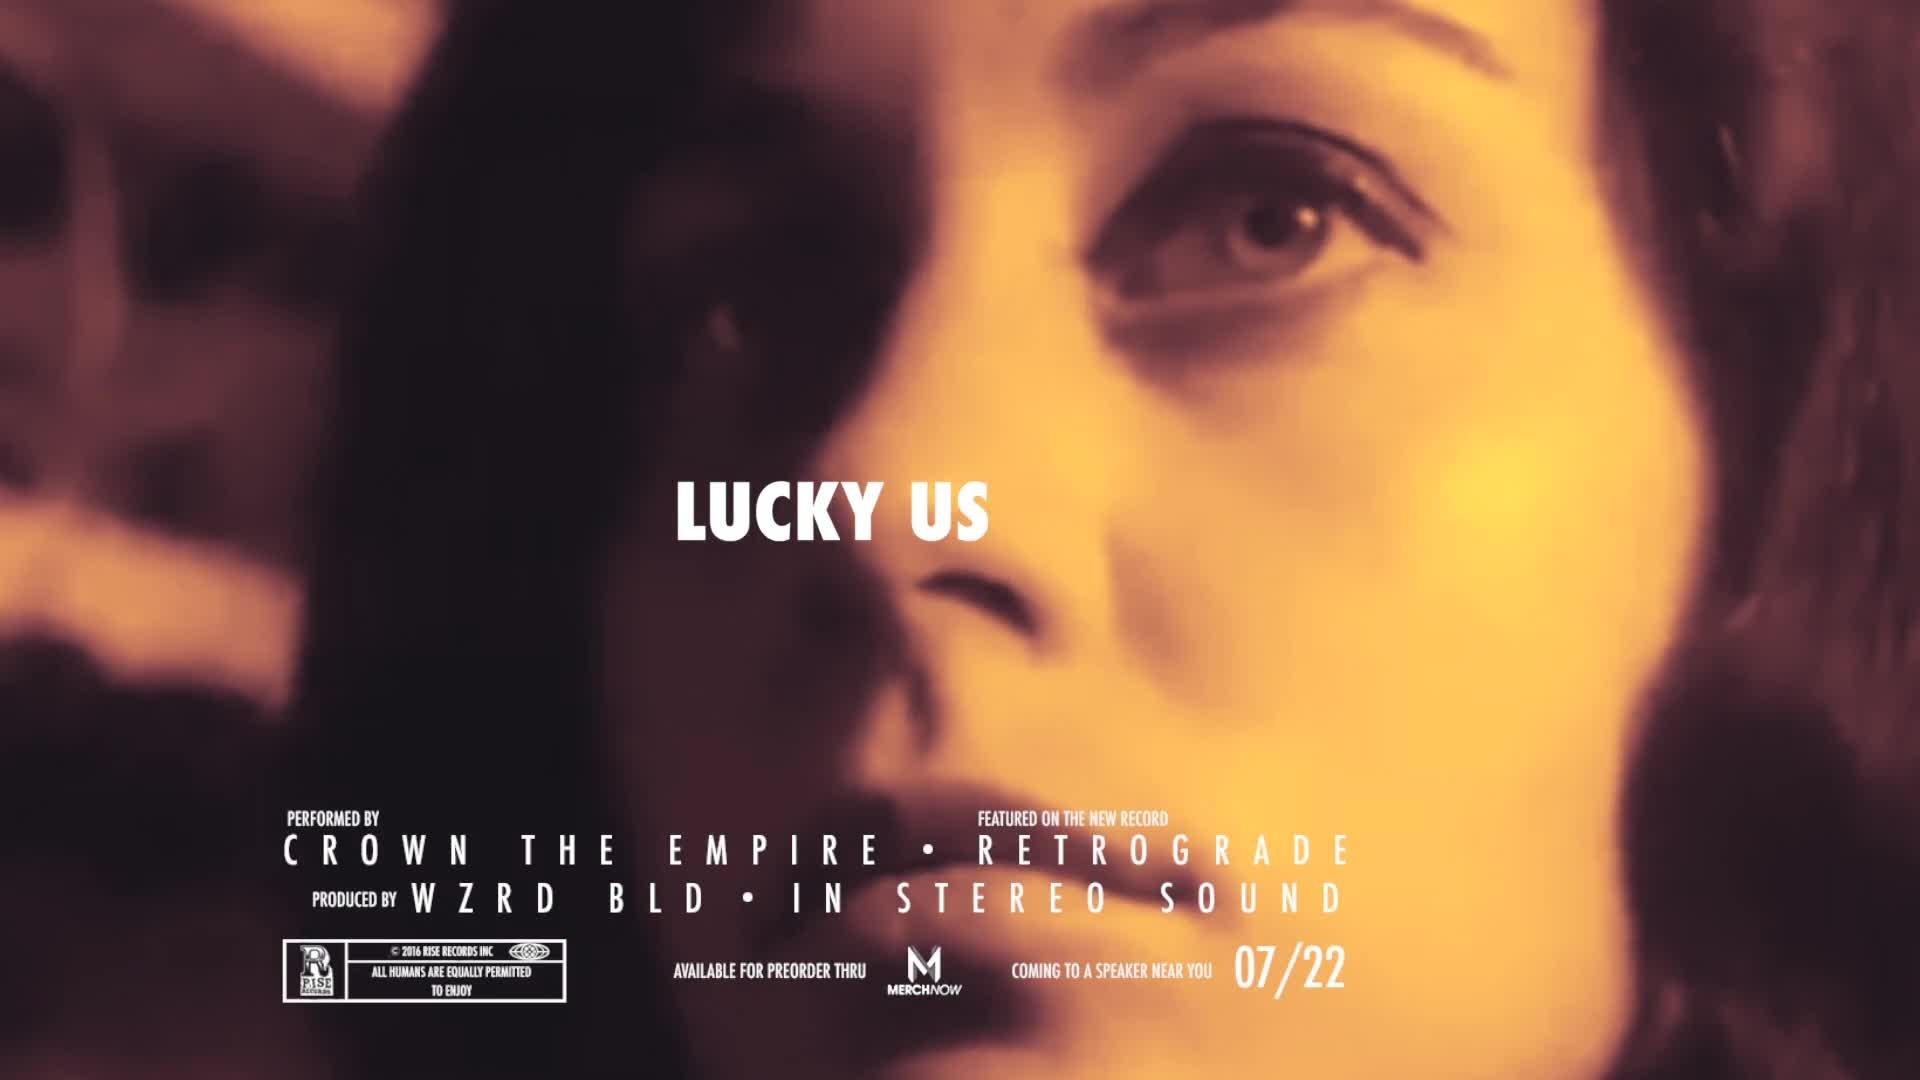 Crown the empire - Lucky Us